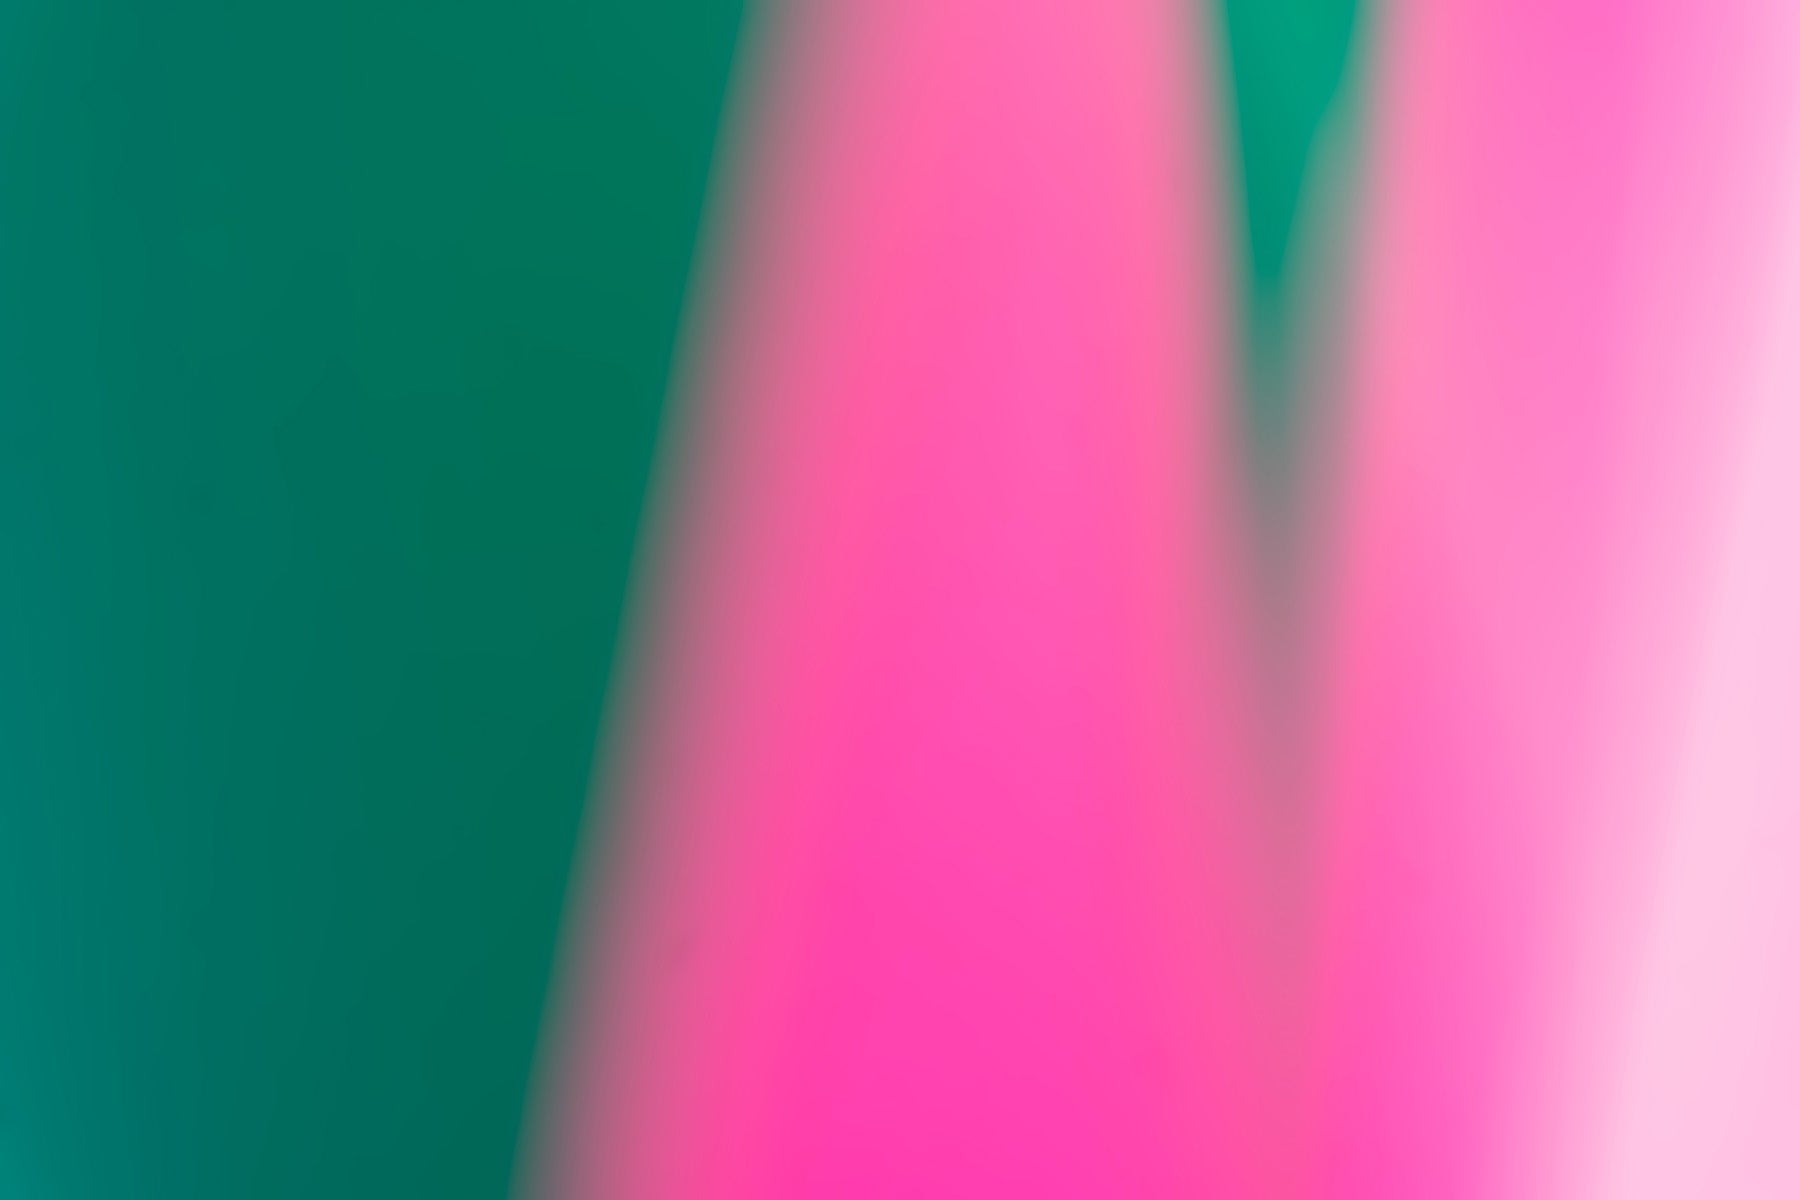 Abstract pink and green background image